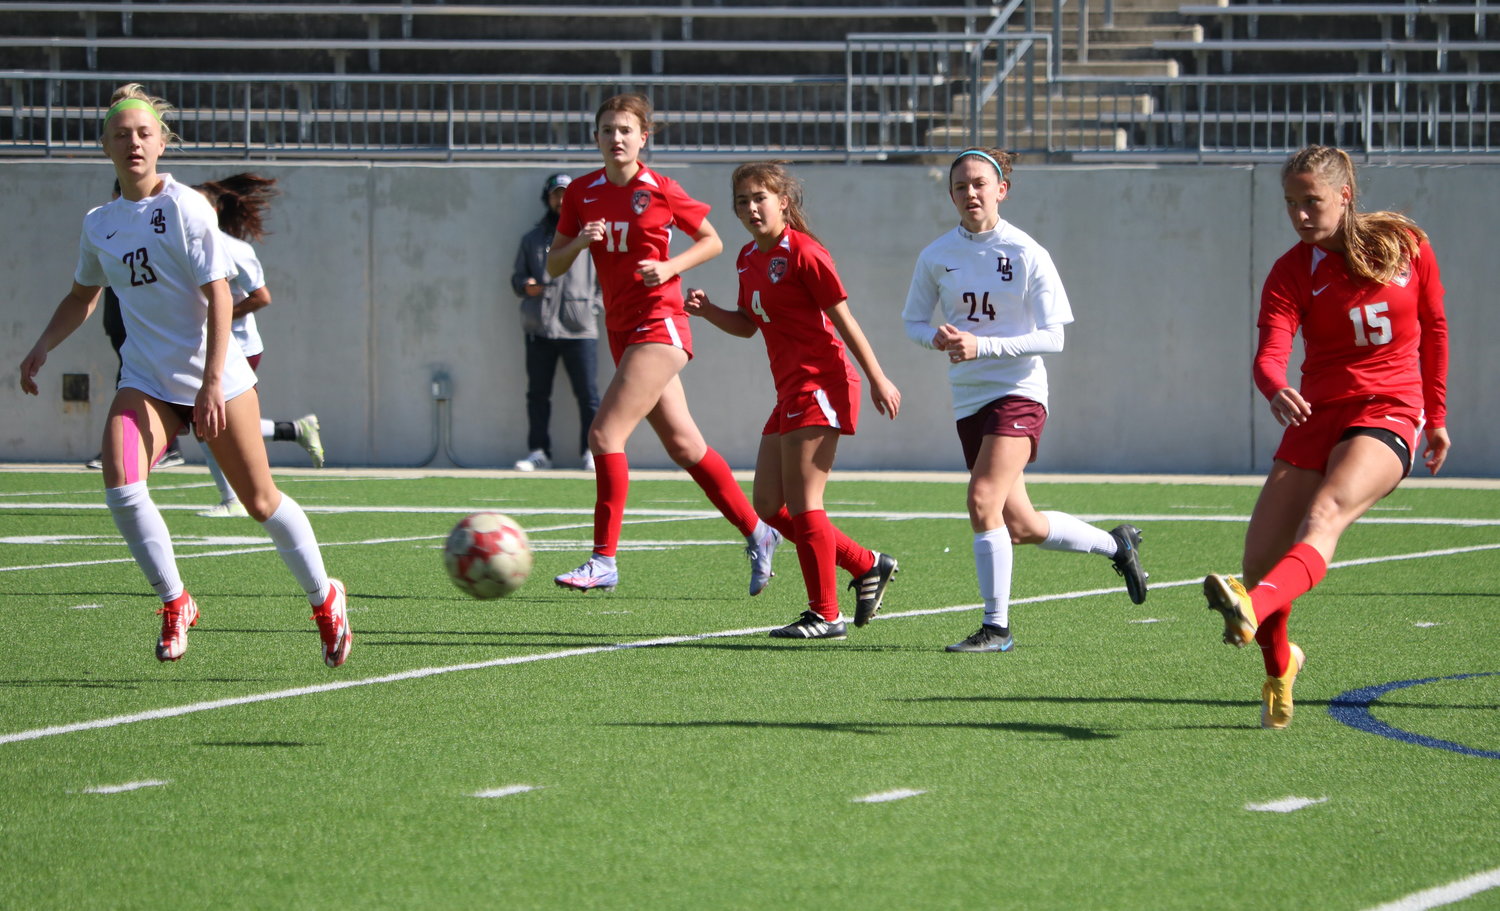 Anna Kneisley passes the ball during a game between Katy and Dripping Springs at Legacy Stadium on Saturday.